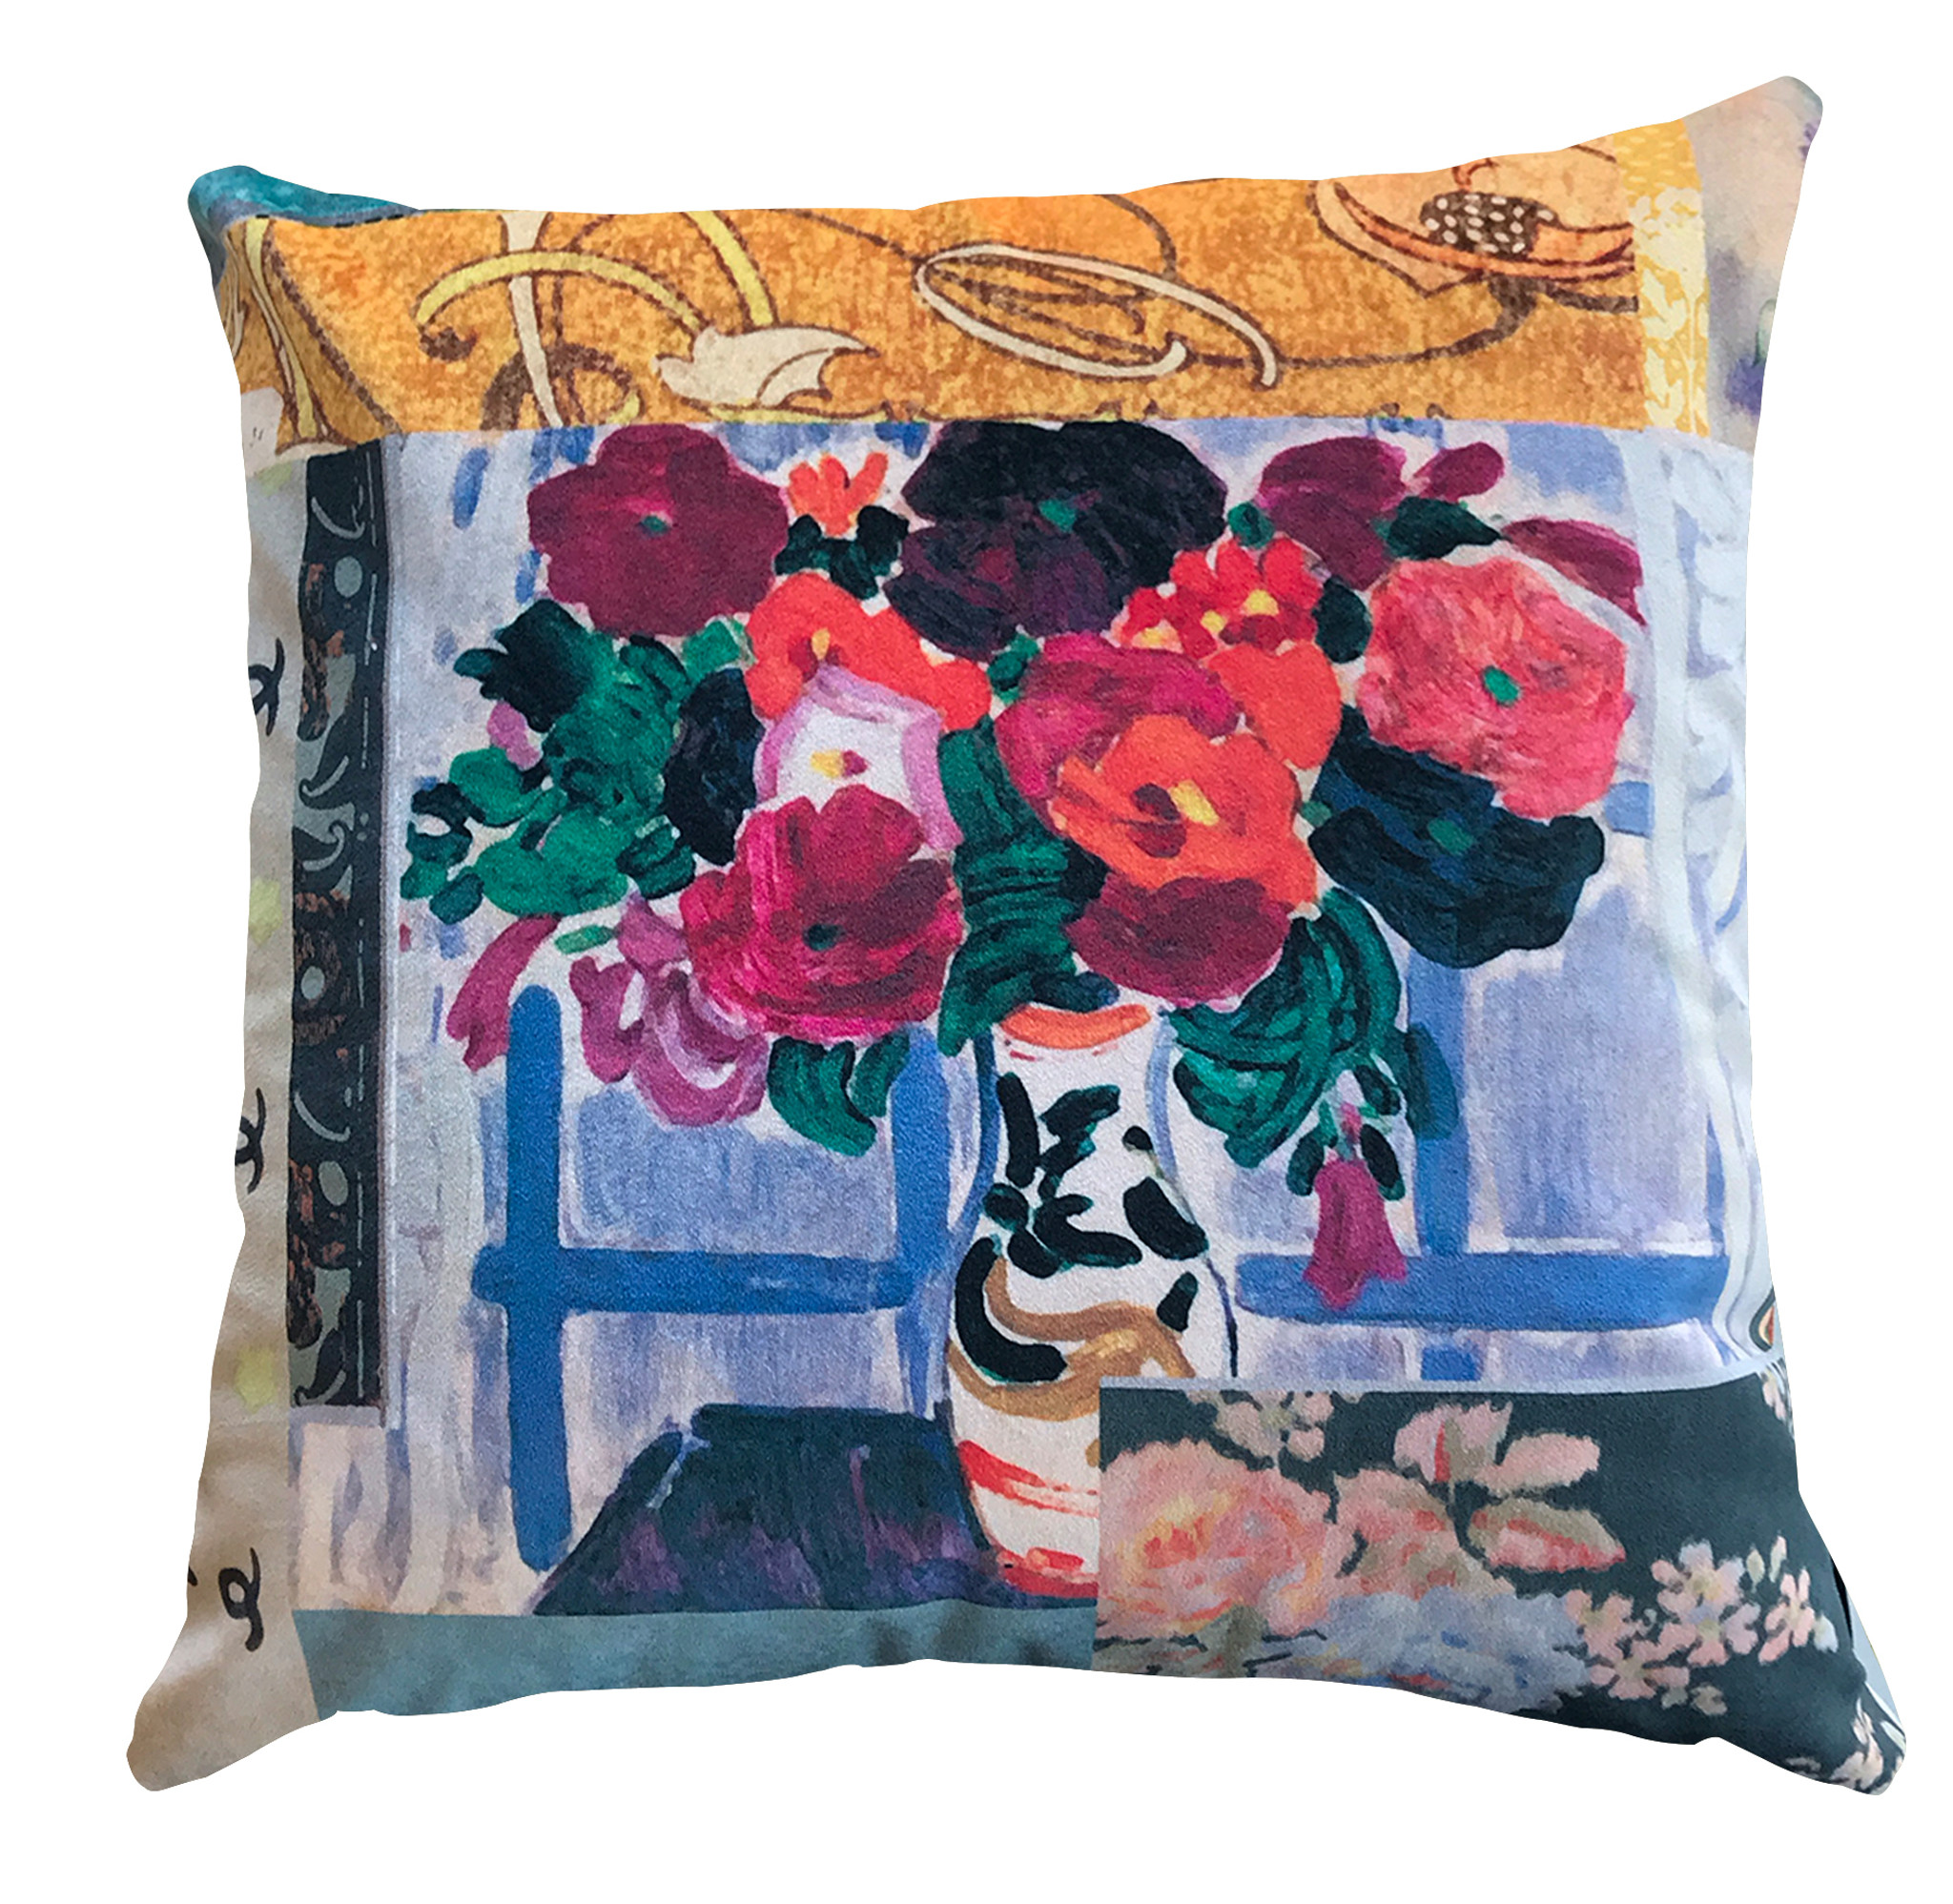 Cushion Cover - Modigliani Was Here - Flowers in Vase